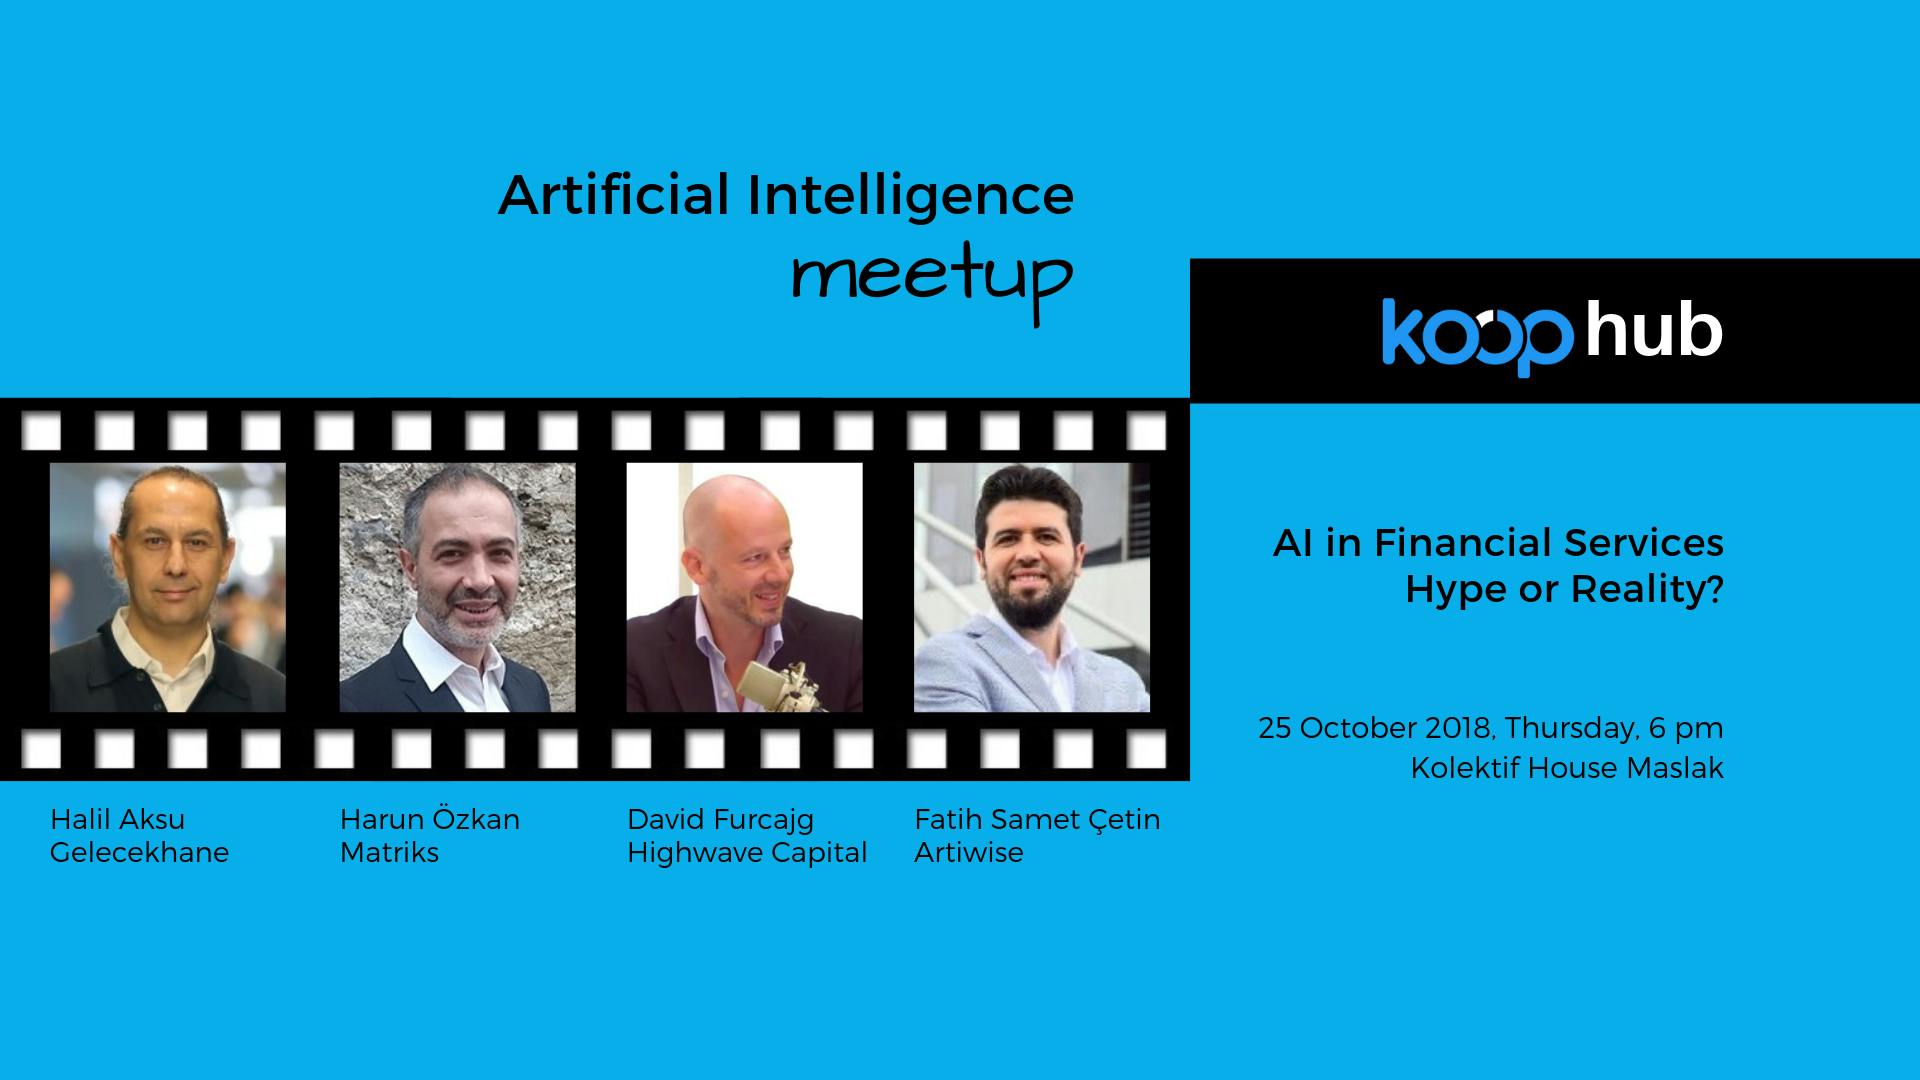 Artificial Intelligence in Financial Services